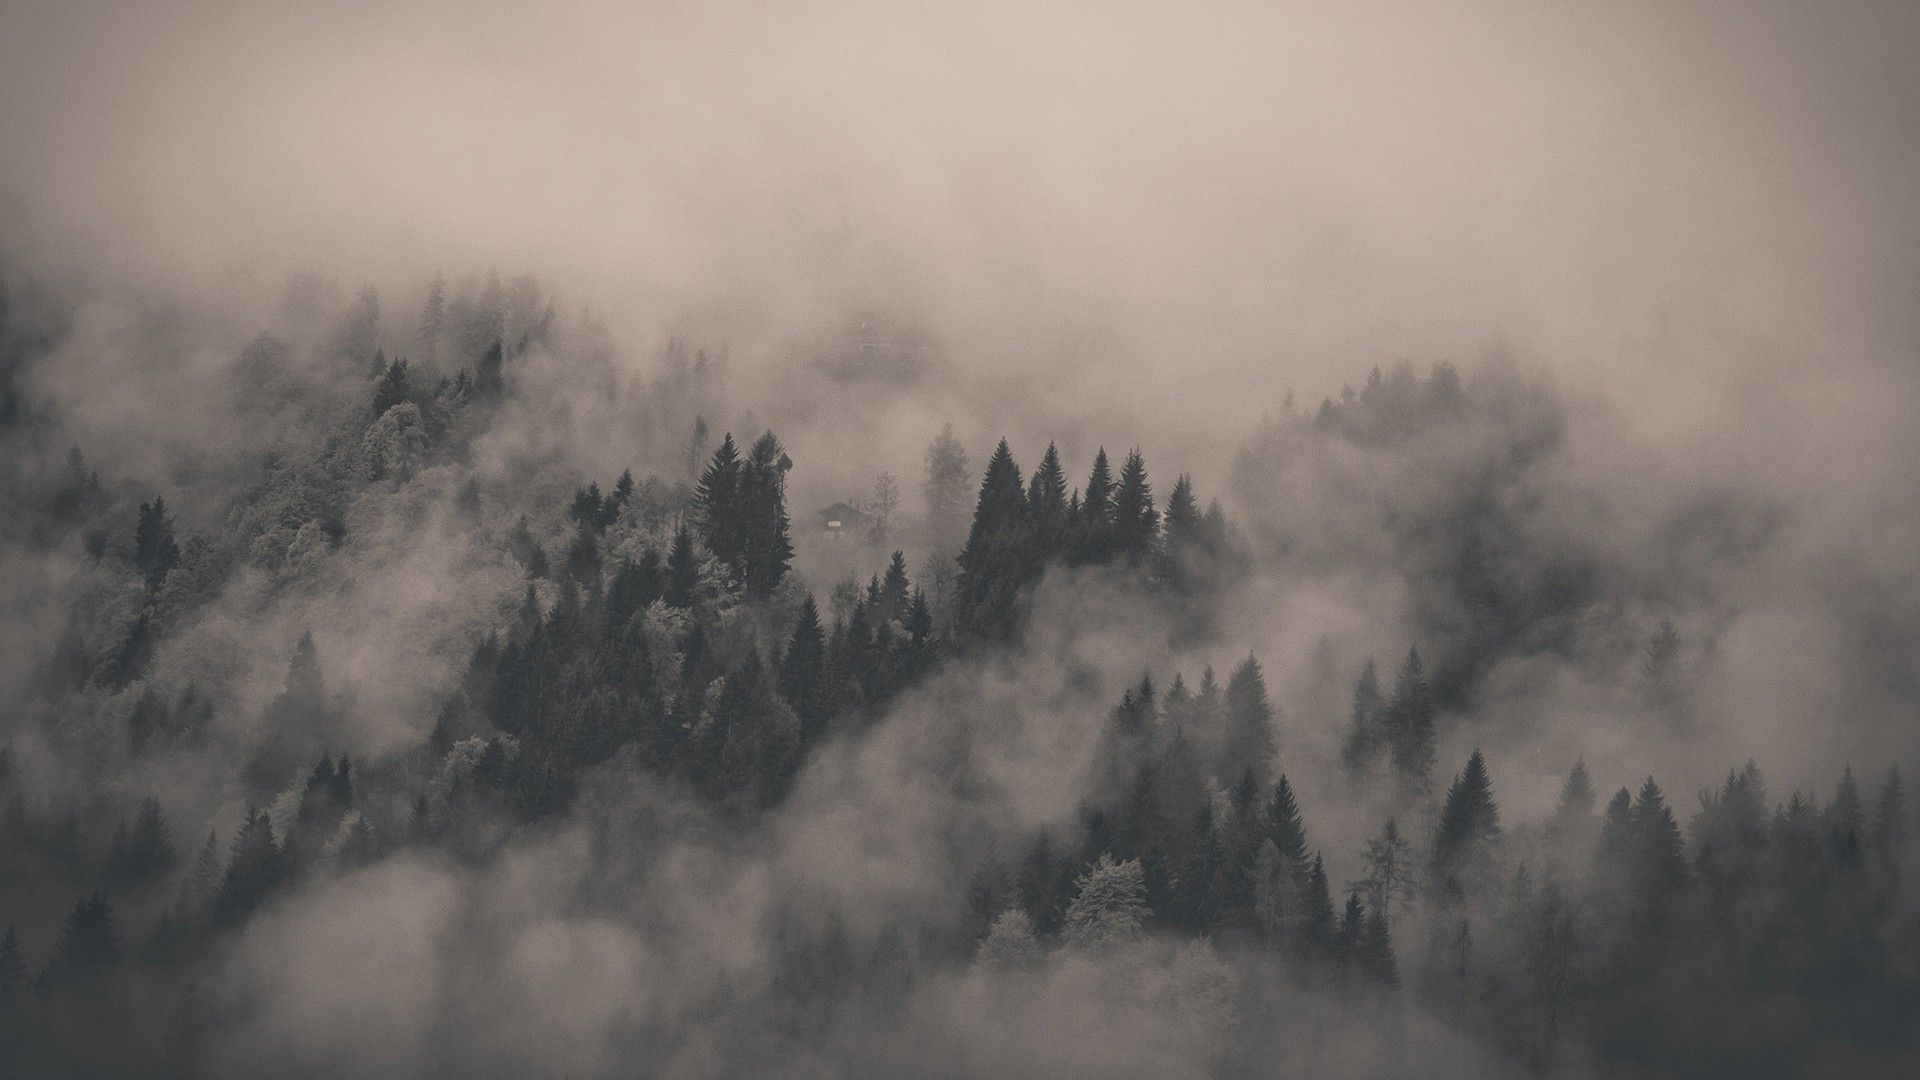 Foggy Forest Wallpaper 74 Images